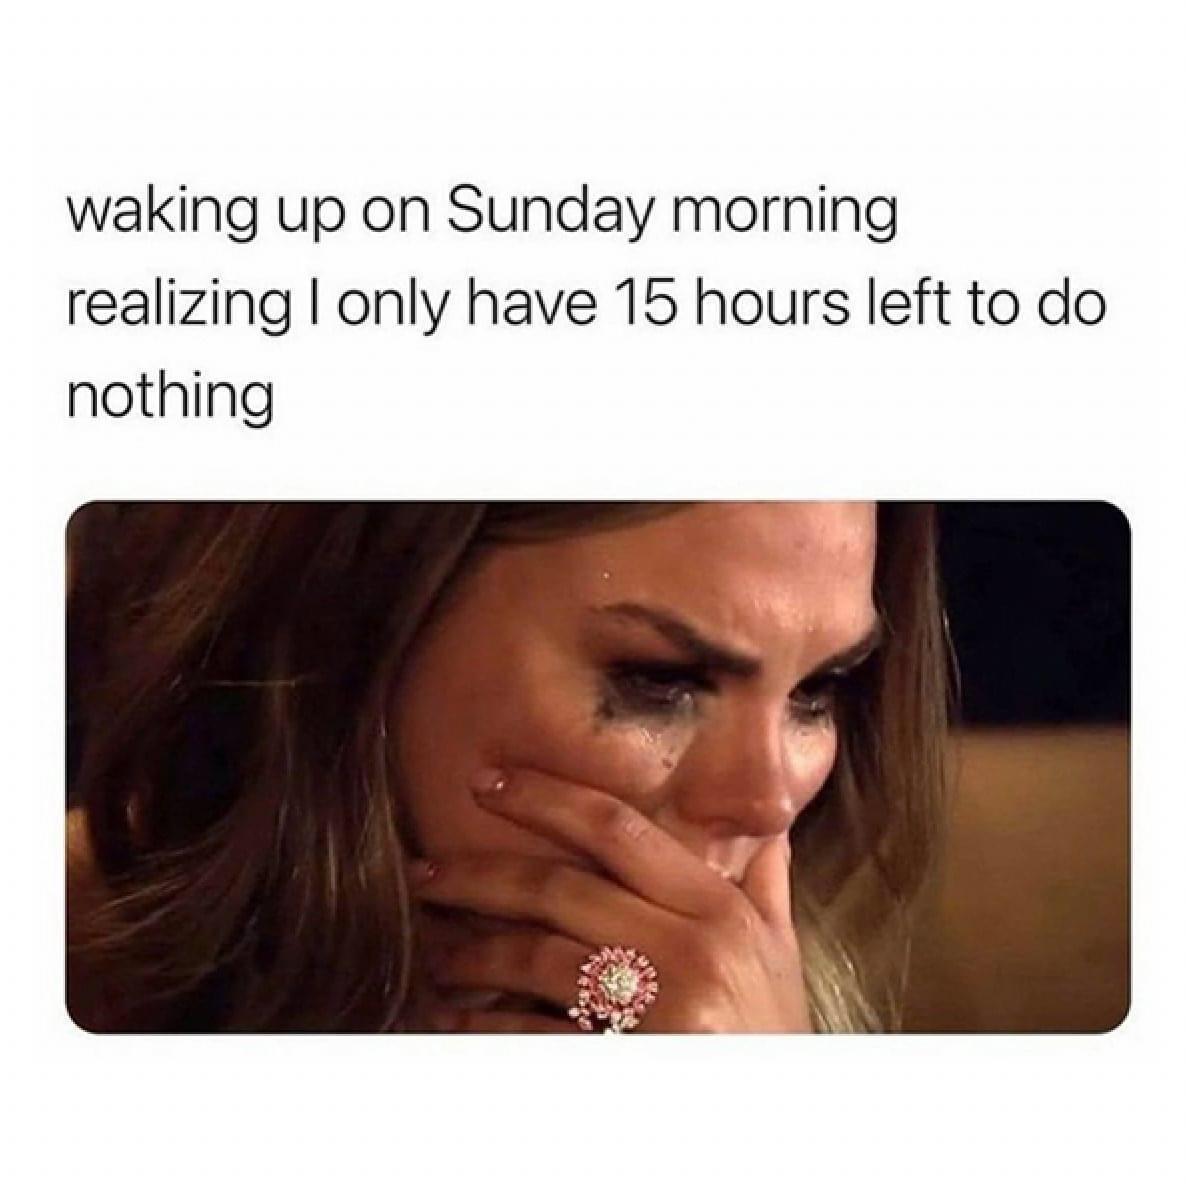 funny memes and pics - hannah brown and peter bachelor - waking up on Sunday morning realizing I only have to do nothing